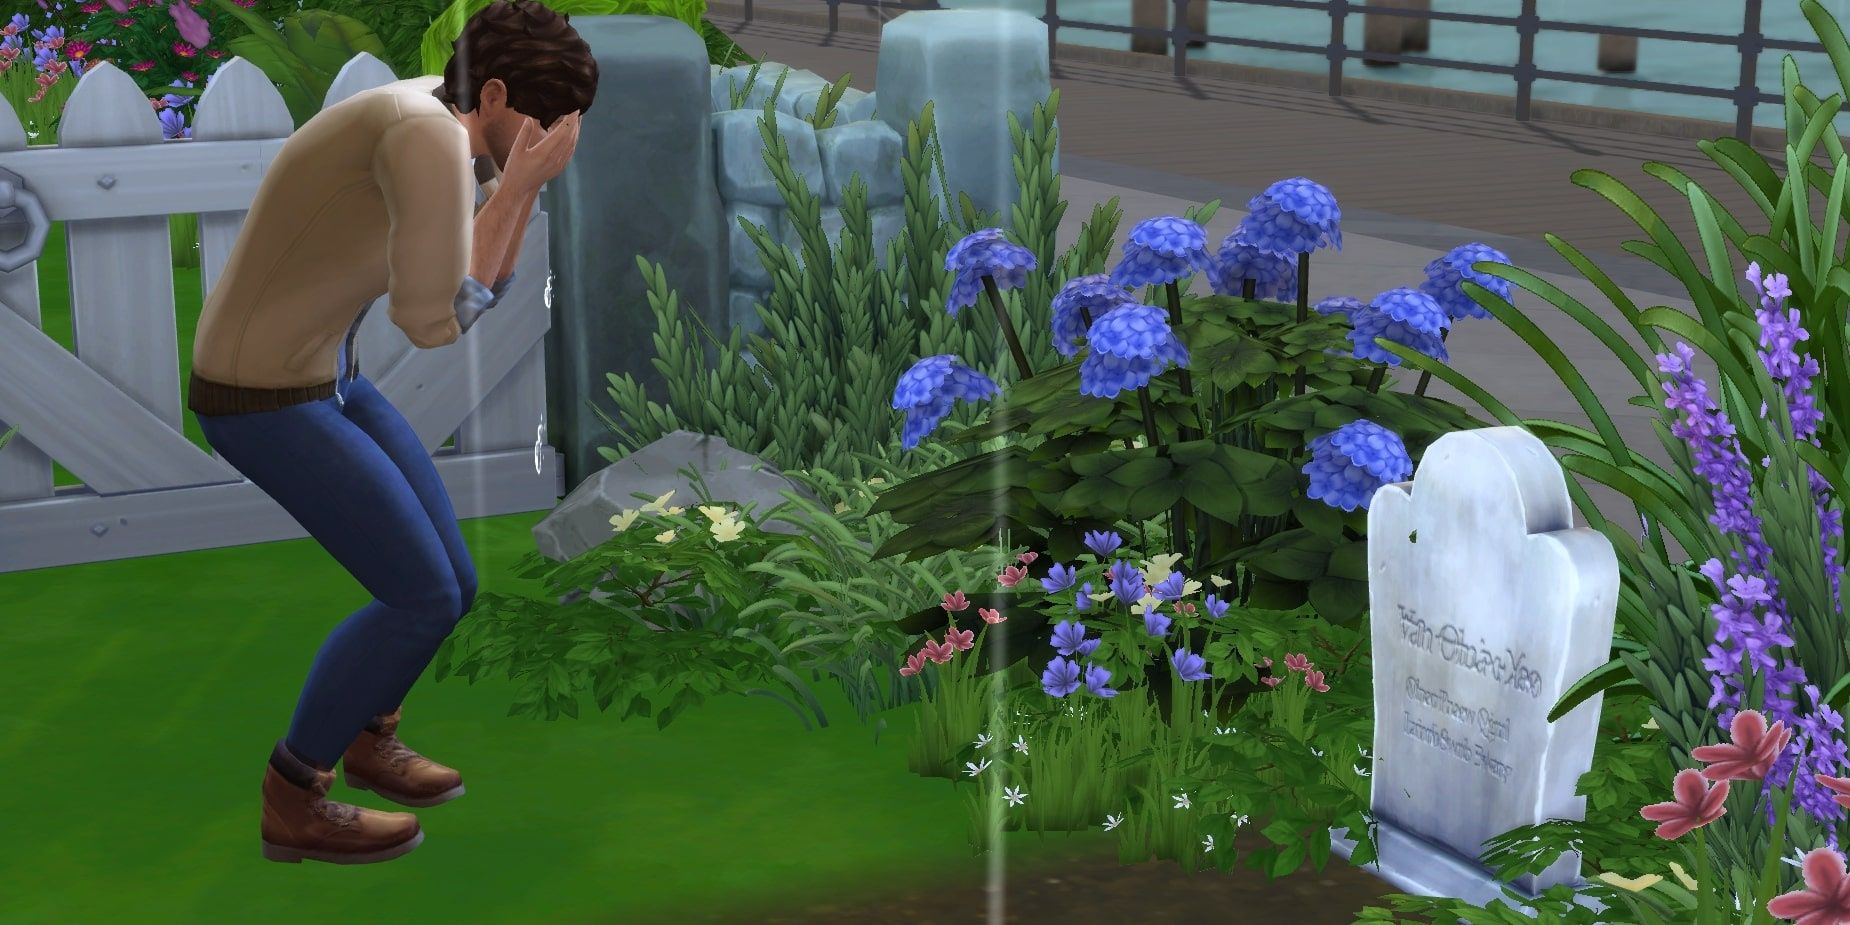 On the Memorial Day holiday, a Sim is mourning a loved on at a gravesite adorned with flowers